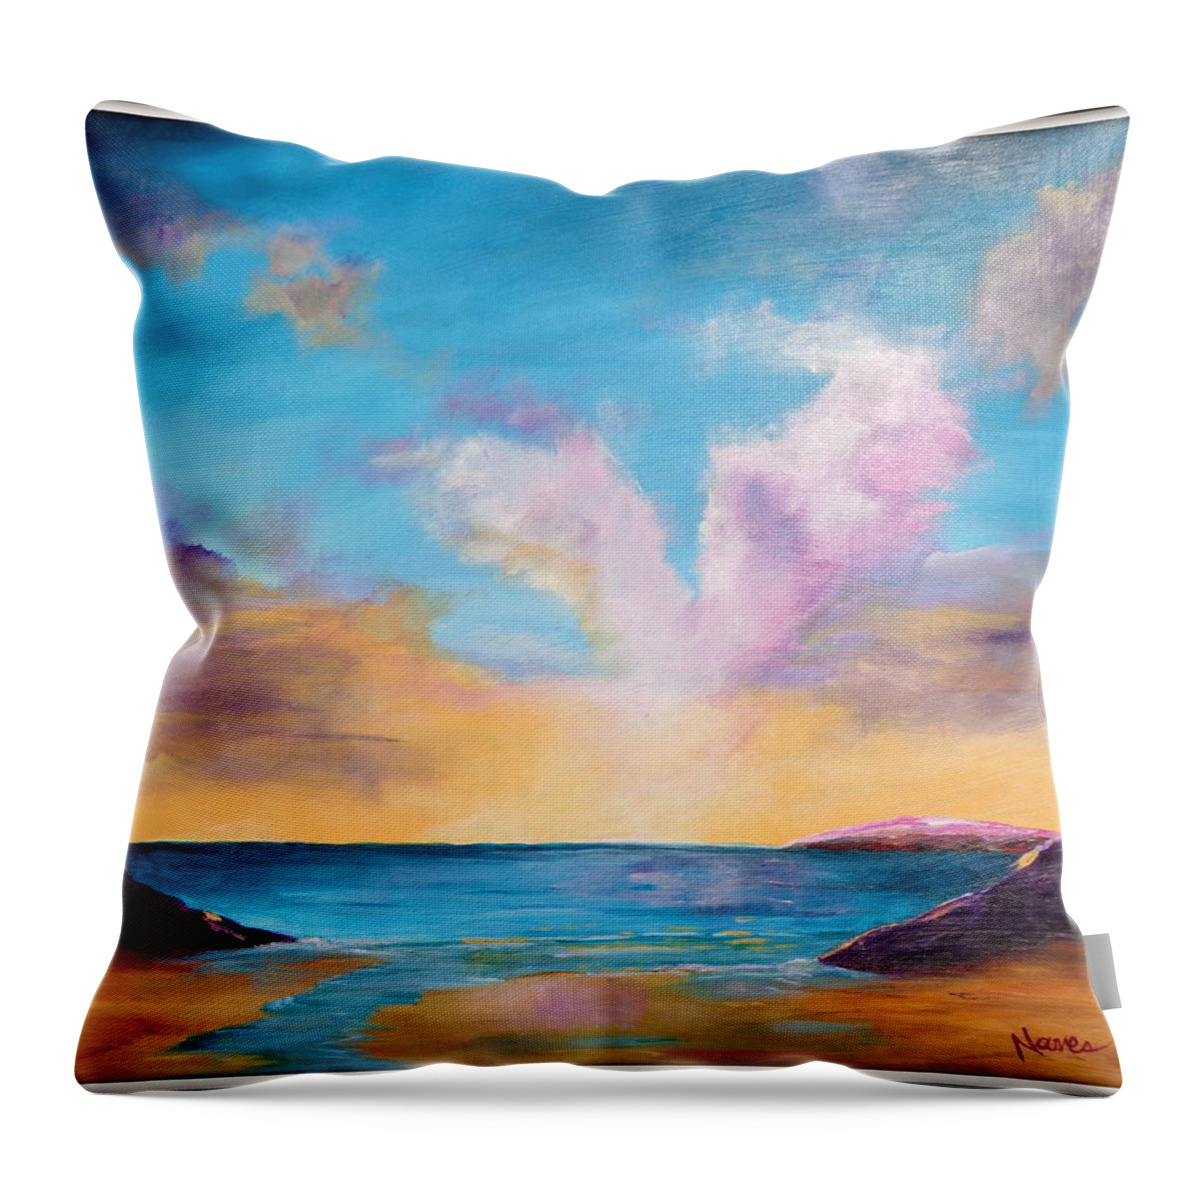 Sunset Painting Throw Pillow featuring the painting Sunset Cove by Deborah Naves